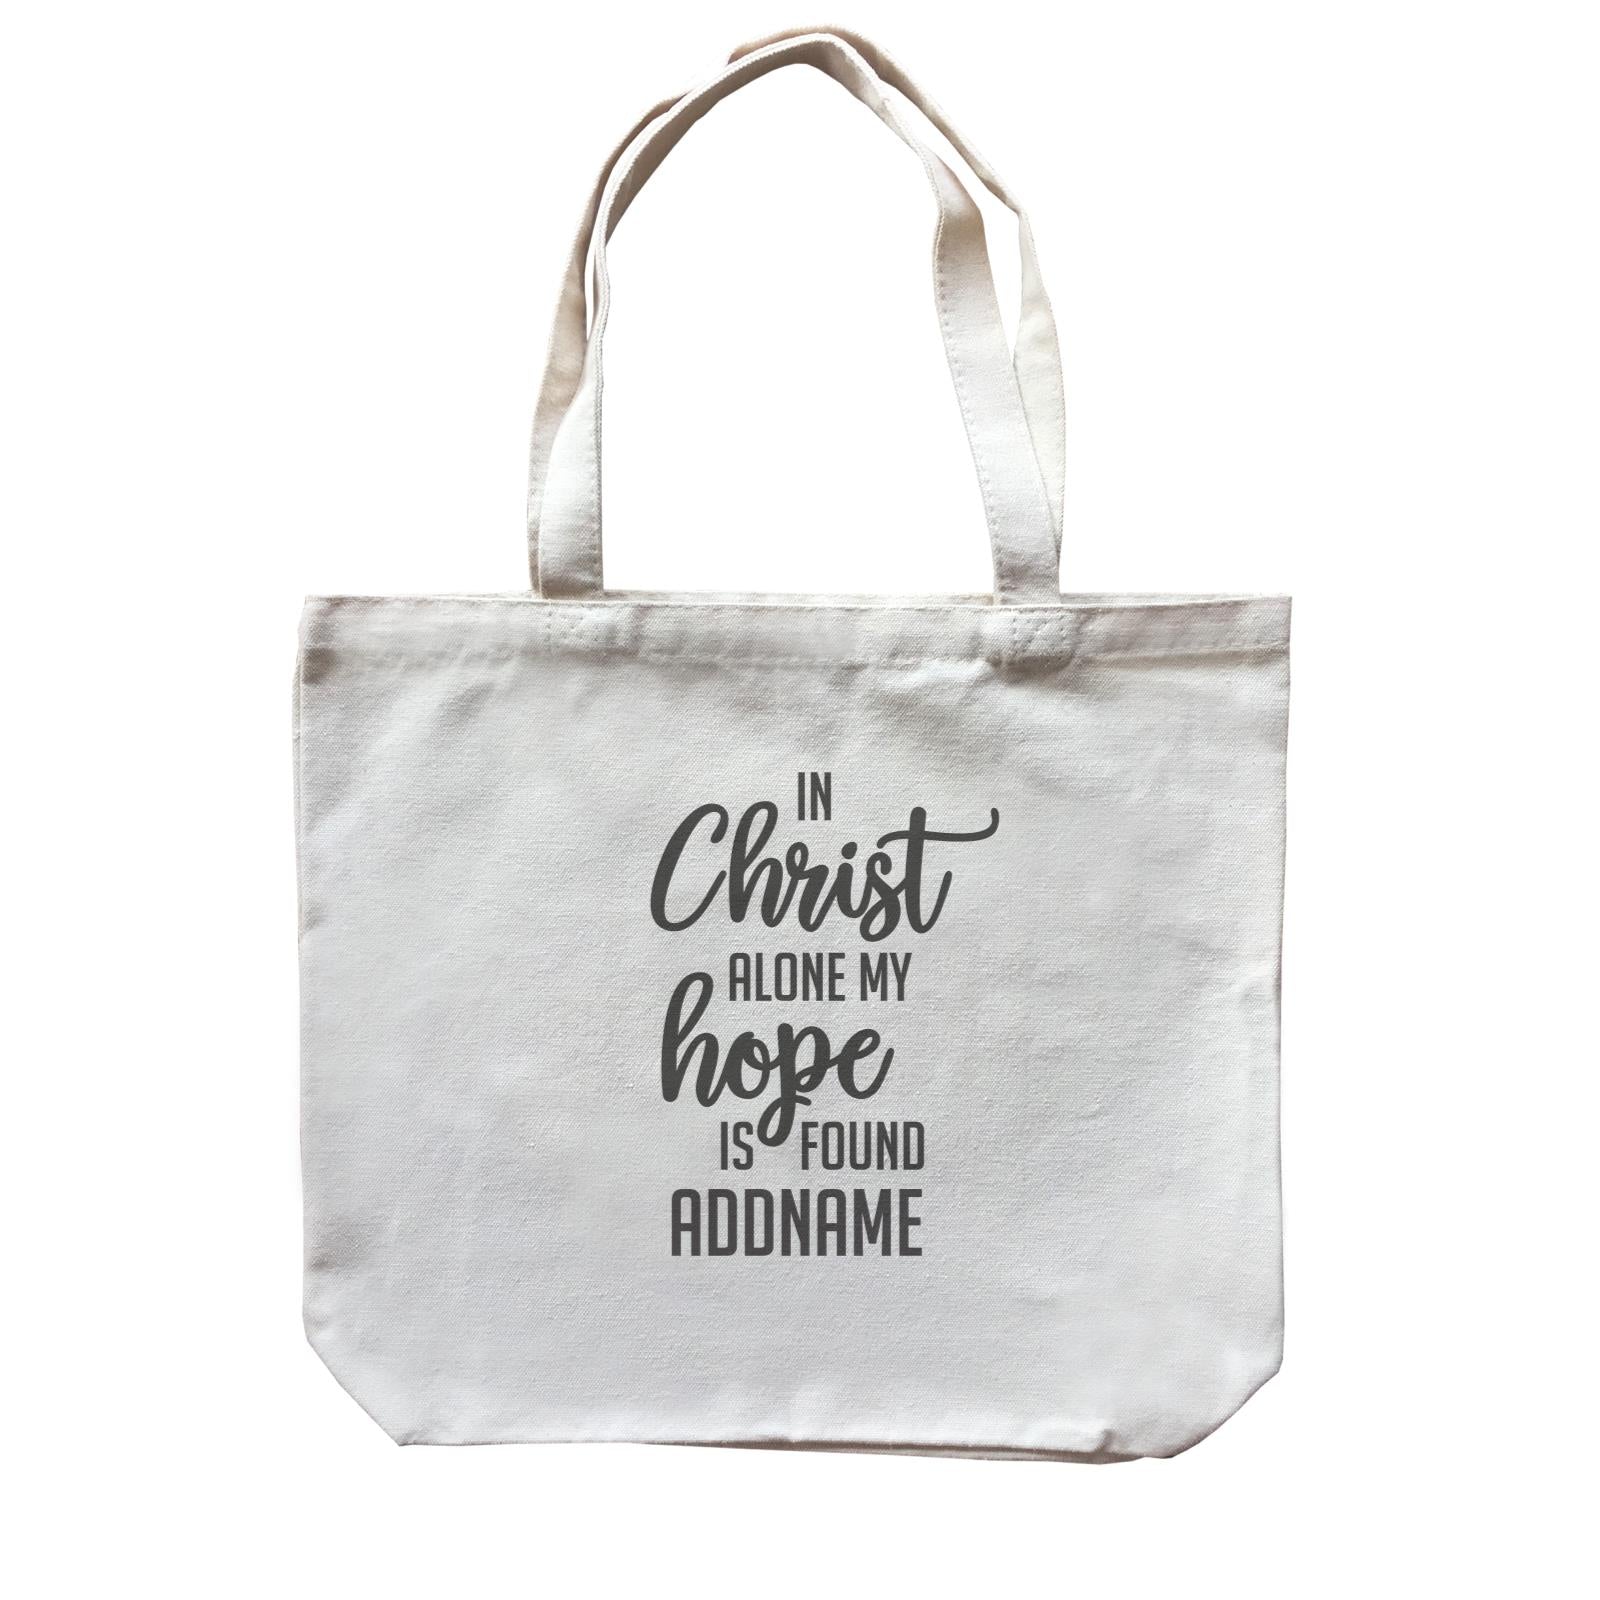 Christian Series In Christ Alone My Hope Is Found Addname Canvas Bag